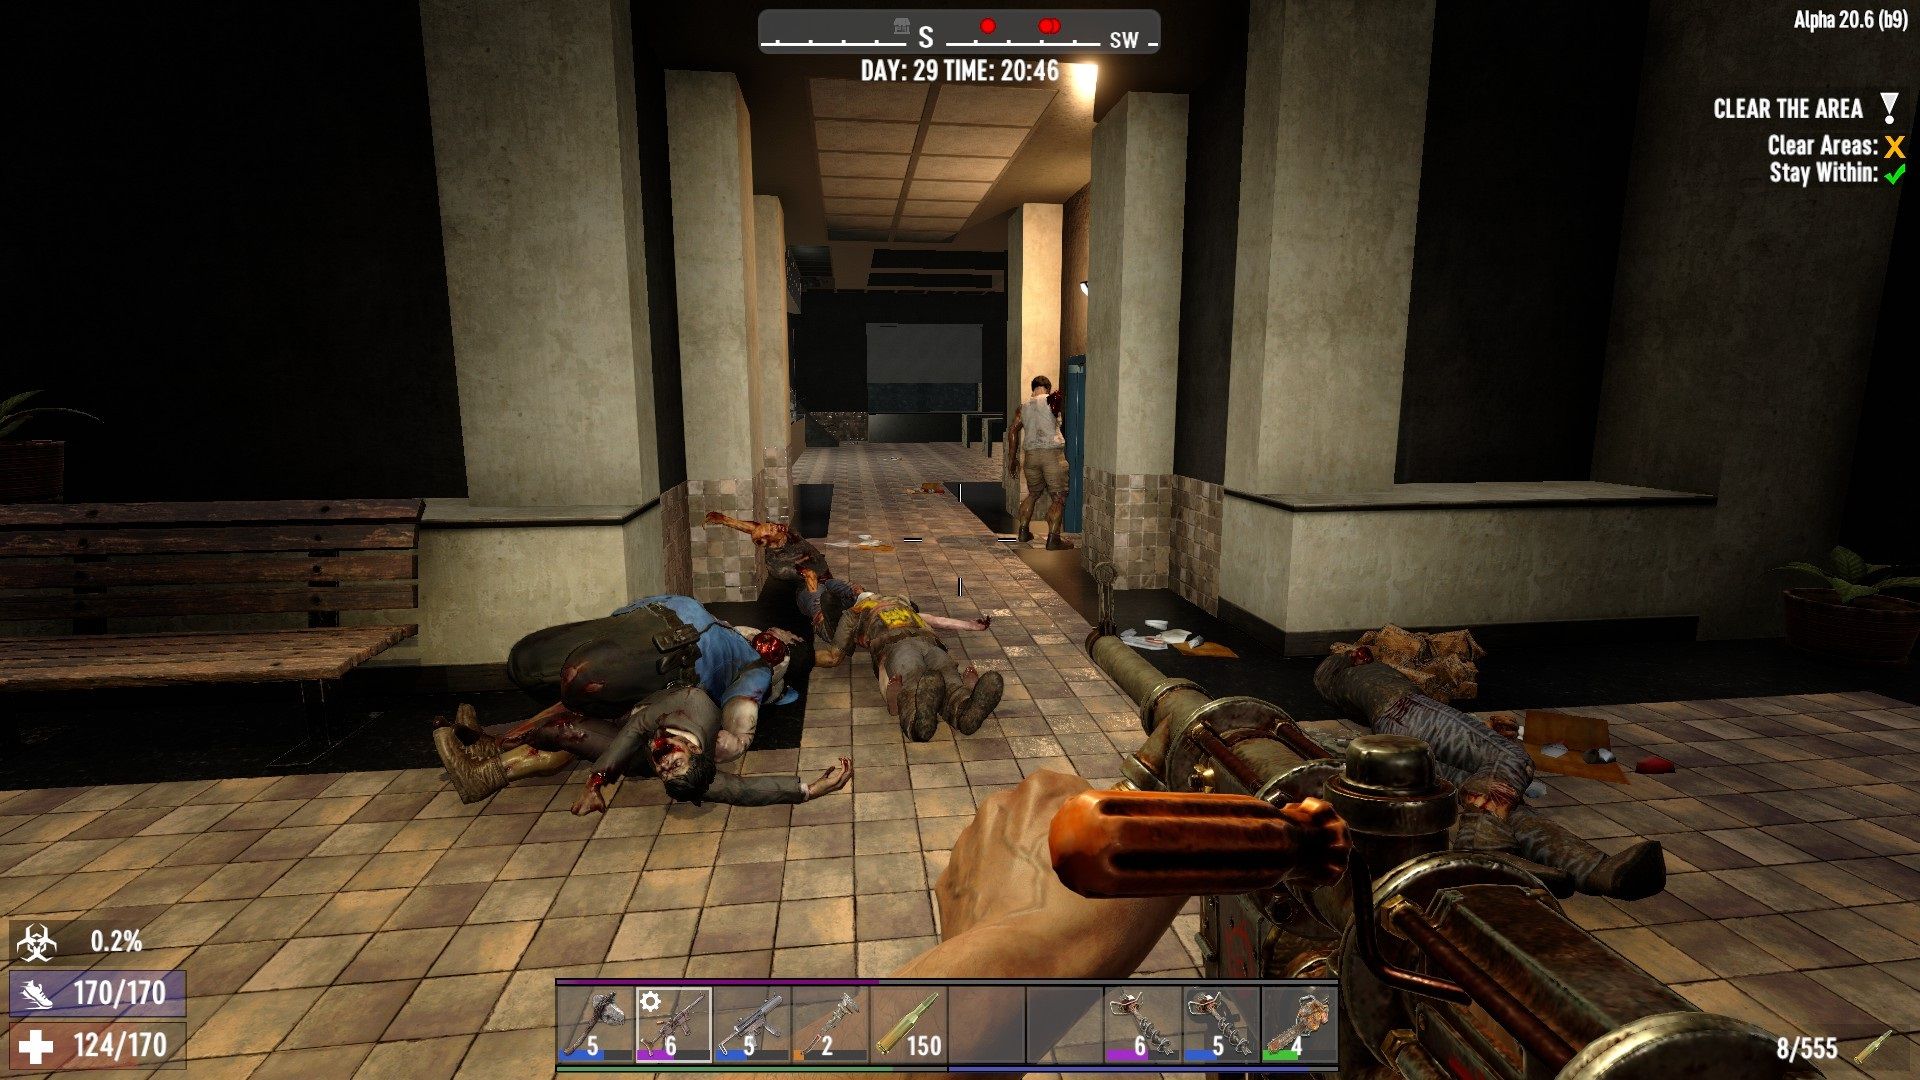 taking out a few zombies from a bathroom area Shotgun Messiah 7 Days To Die.jpg